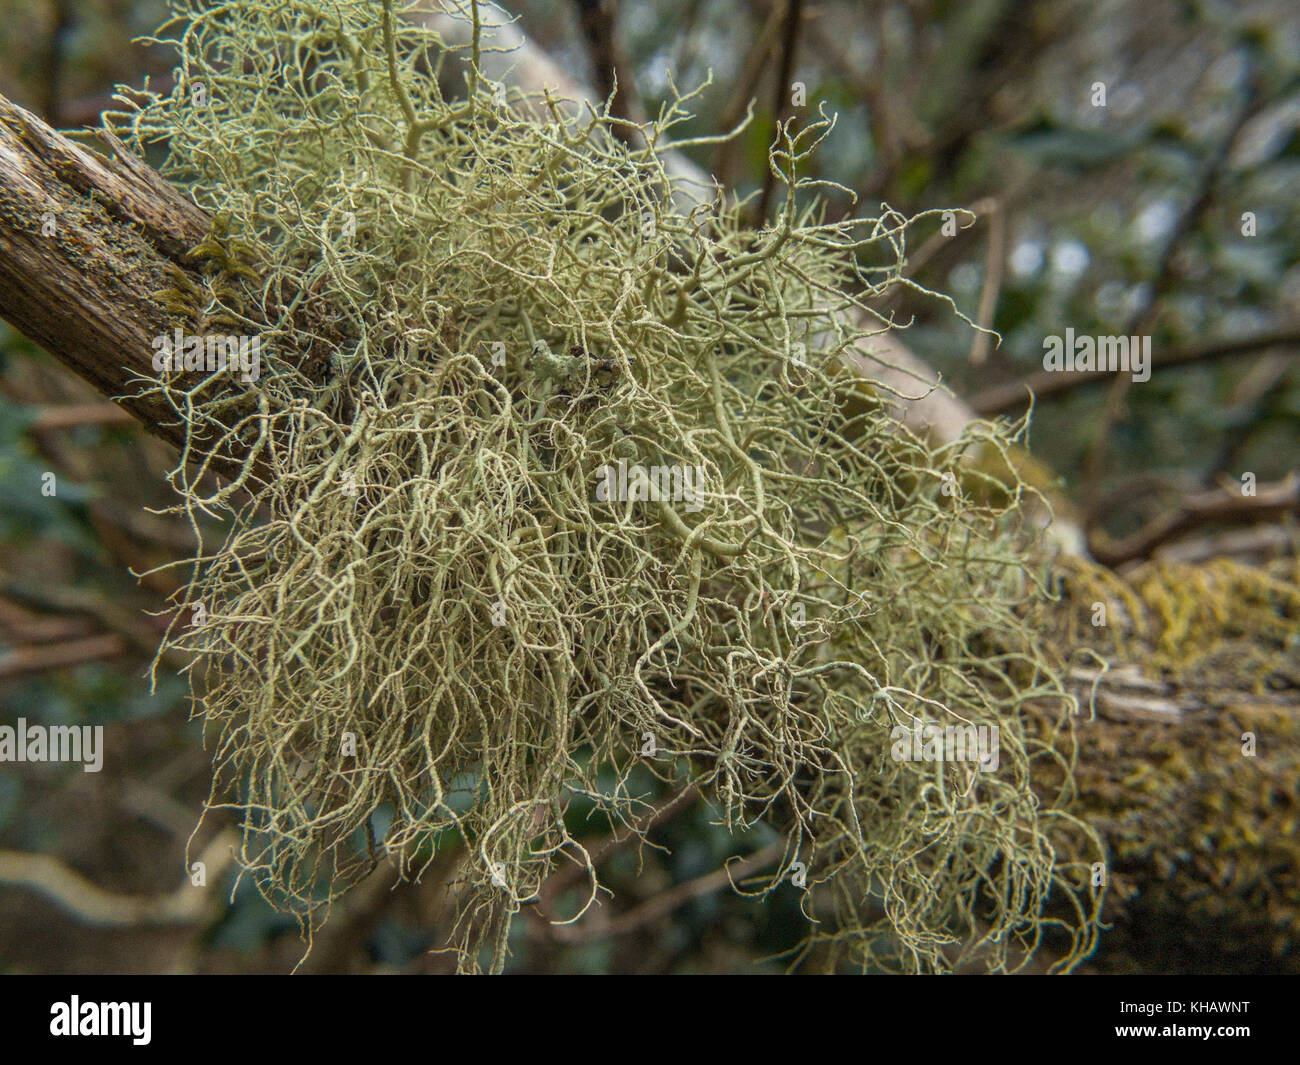 Some form of whispy green lichen thallus on a tree branch. Unidentified fruticose type of lichen. Perhaps a Ramalina or Usnea species. Stock Photo